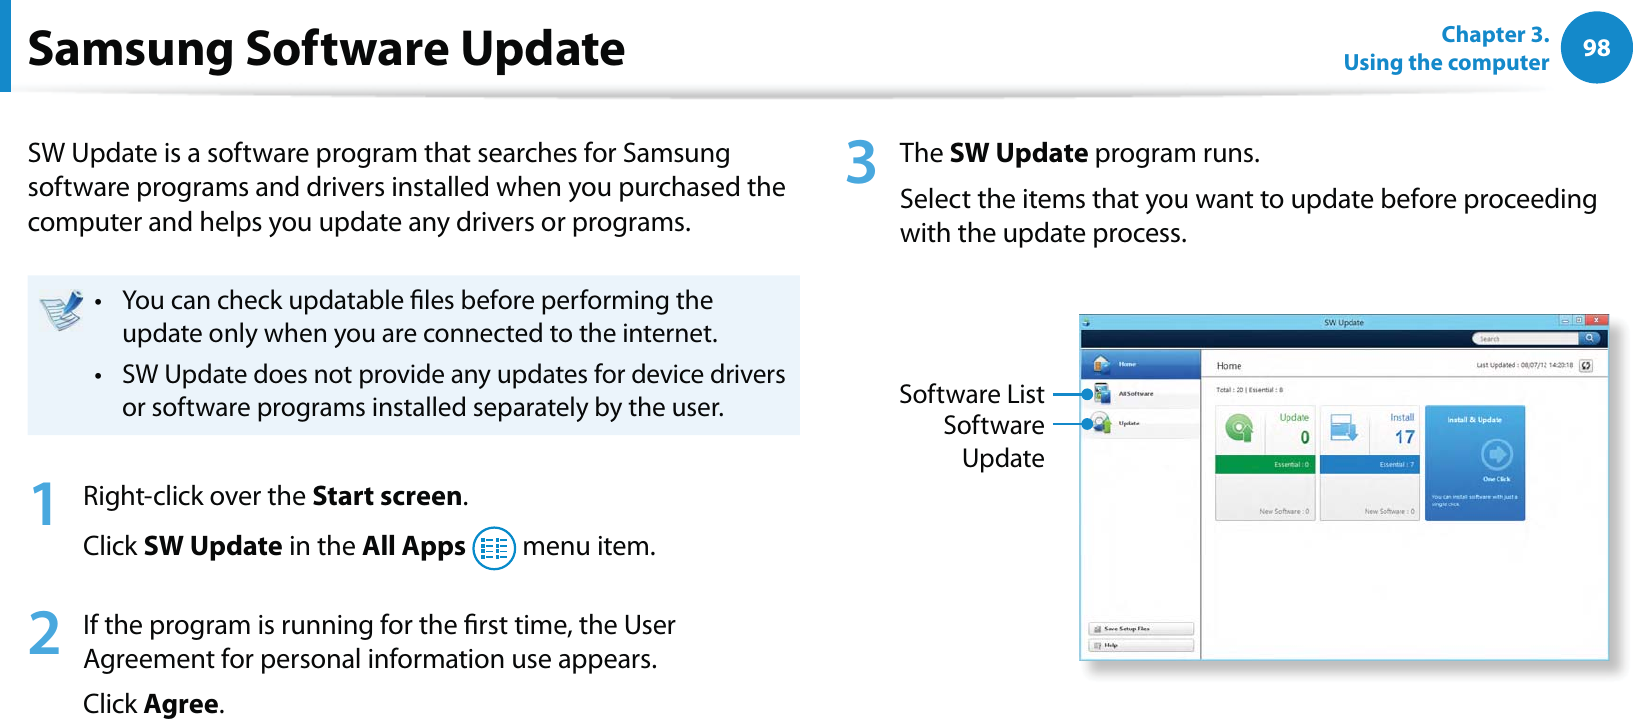 98Chapter 3.  Using the computerSamsung Software UpdateSW Update is a software program that searches for Samsung software programs and drivers installed when you purchased the computer and helps you update any drivers or programs.You can check updatable les before performing the t update only when you are connected to the internet.SW Update does not provide any updates for device drivers t or software programs installed separately by the user.1  Right-click over the Start screen.Click SW Update in the All Apps  menu item.2  If the program is running for the rst time, the User Agreement for personal information use appears. Click Agree.3 The SW Update program runs. Select the items that you want to update before proceeding with the update process.Software UpdateSoftware List